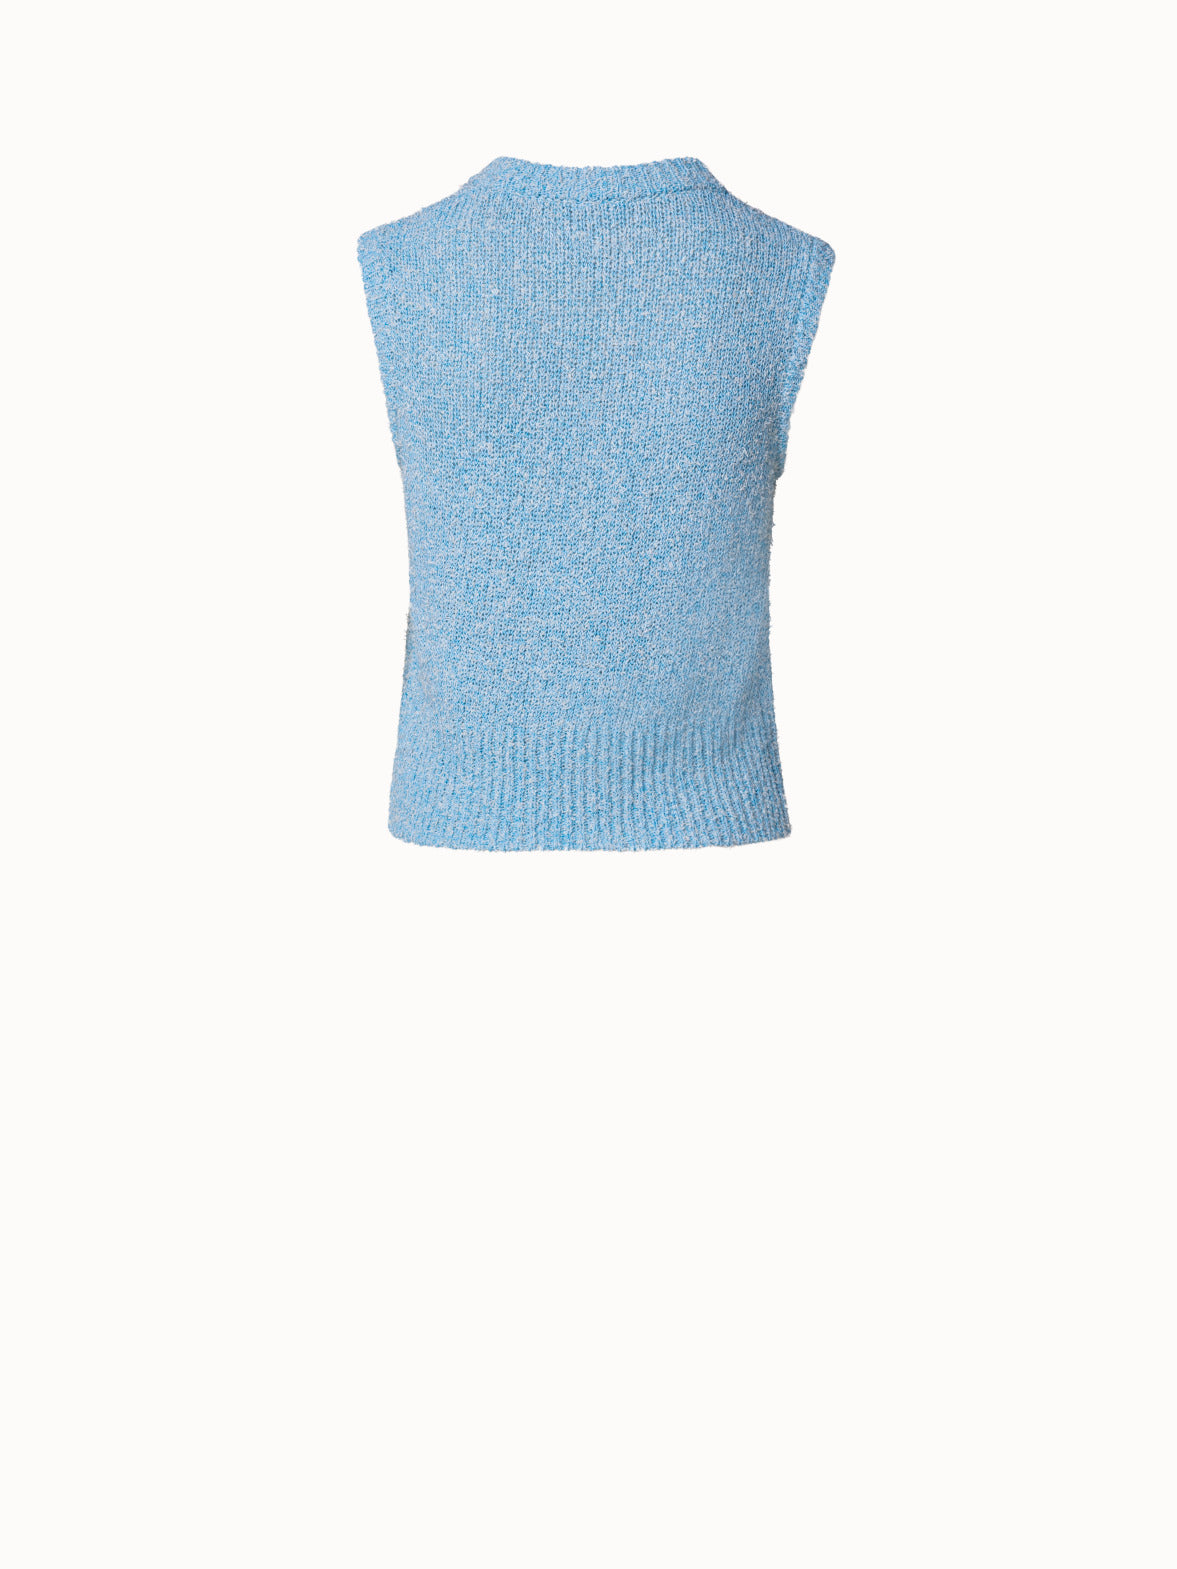 Cotton Boucle Knit Top - Tops - Clothing